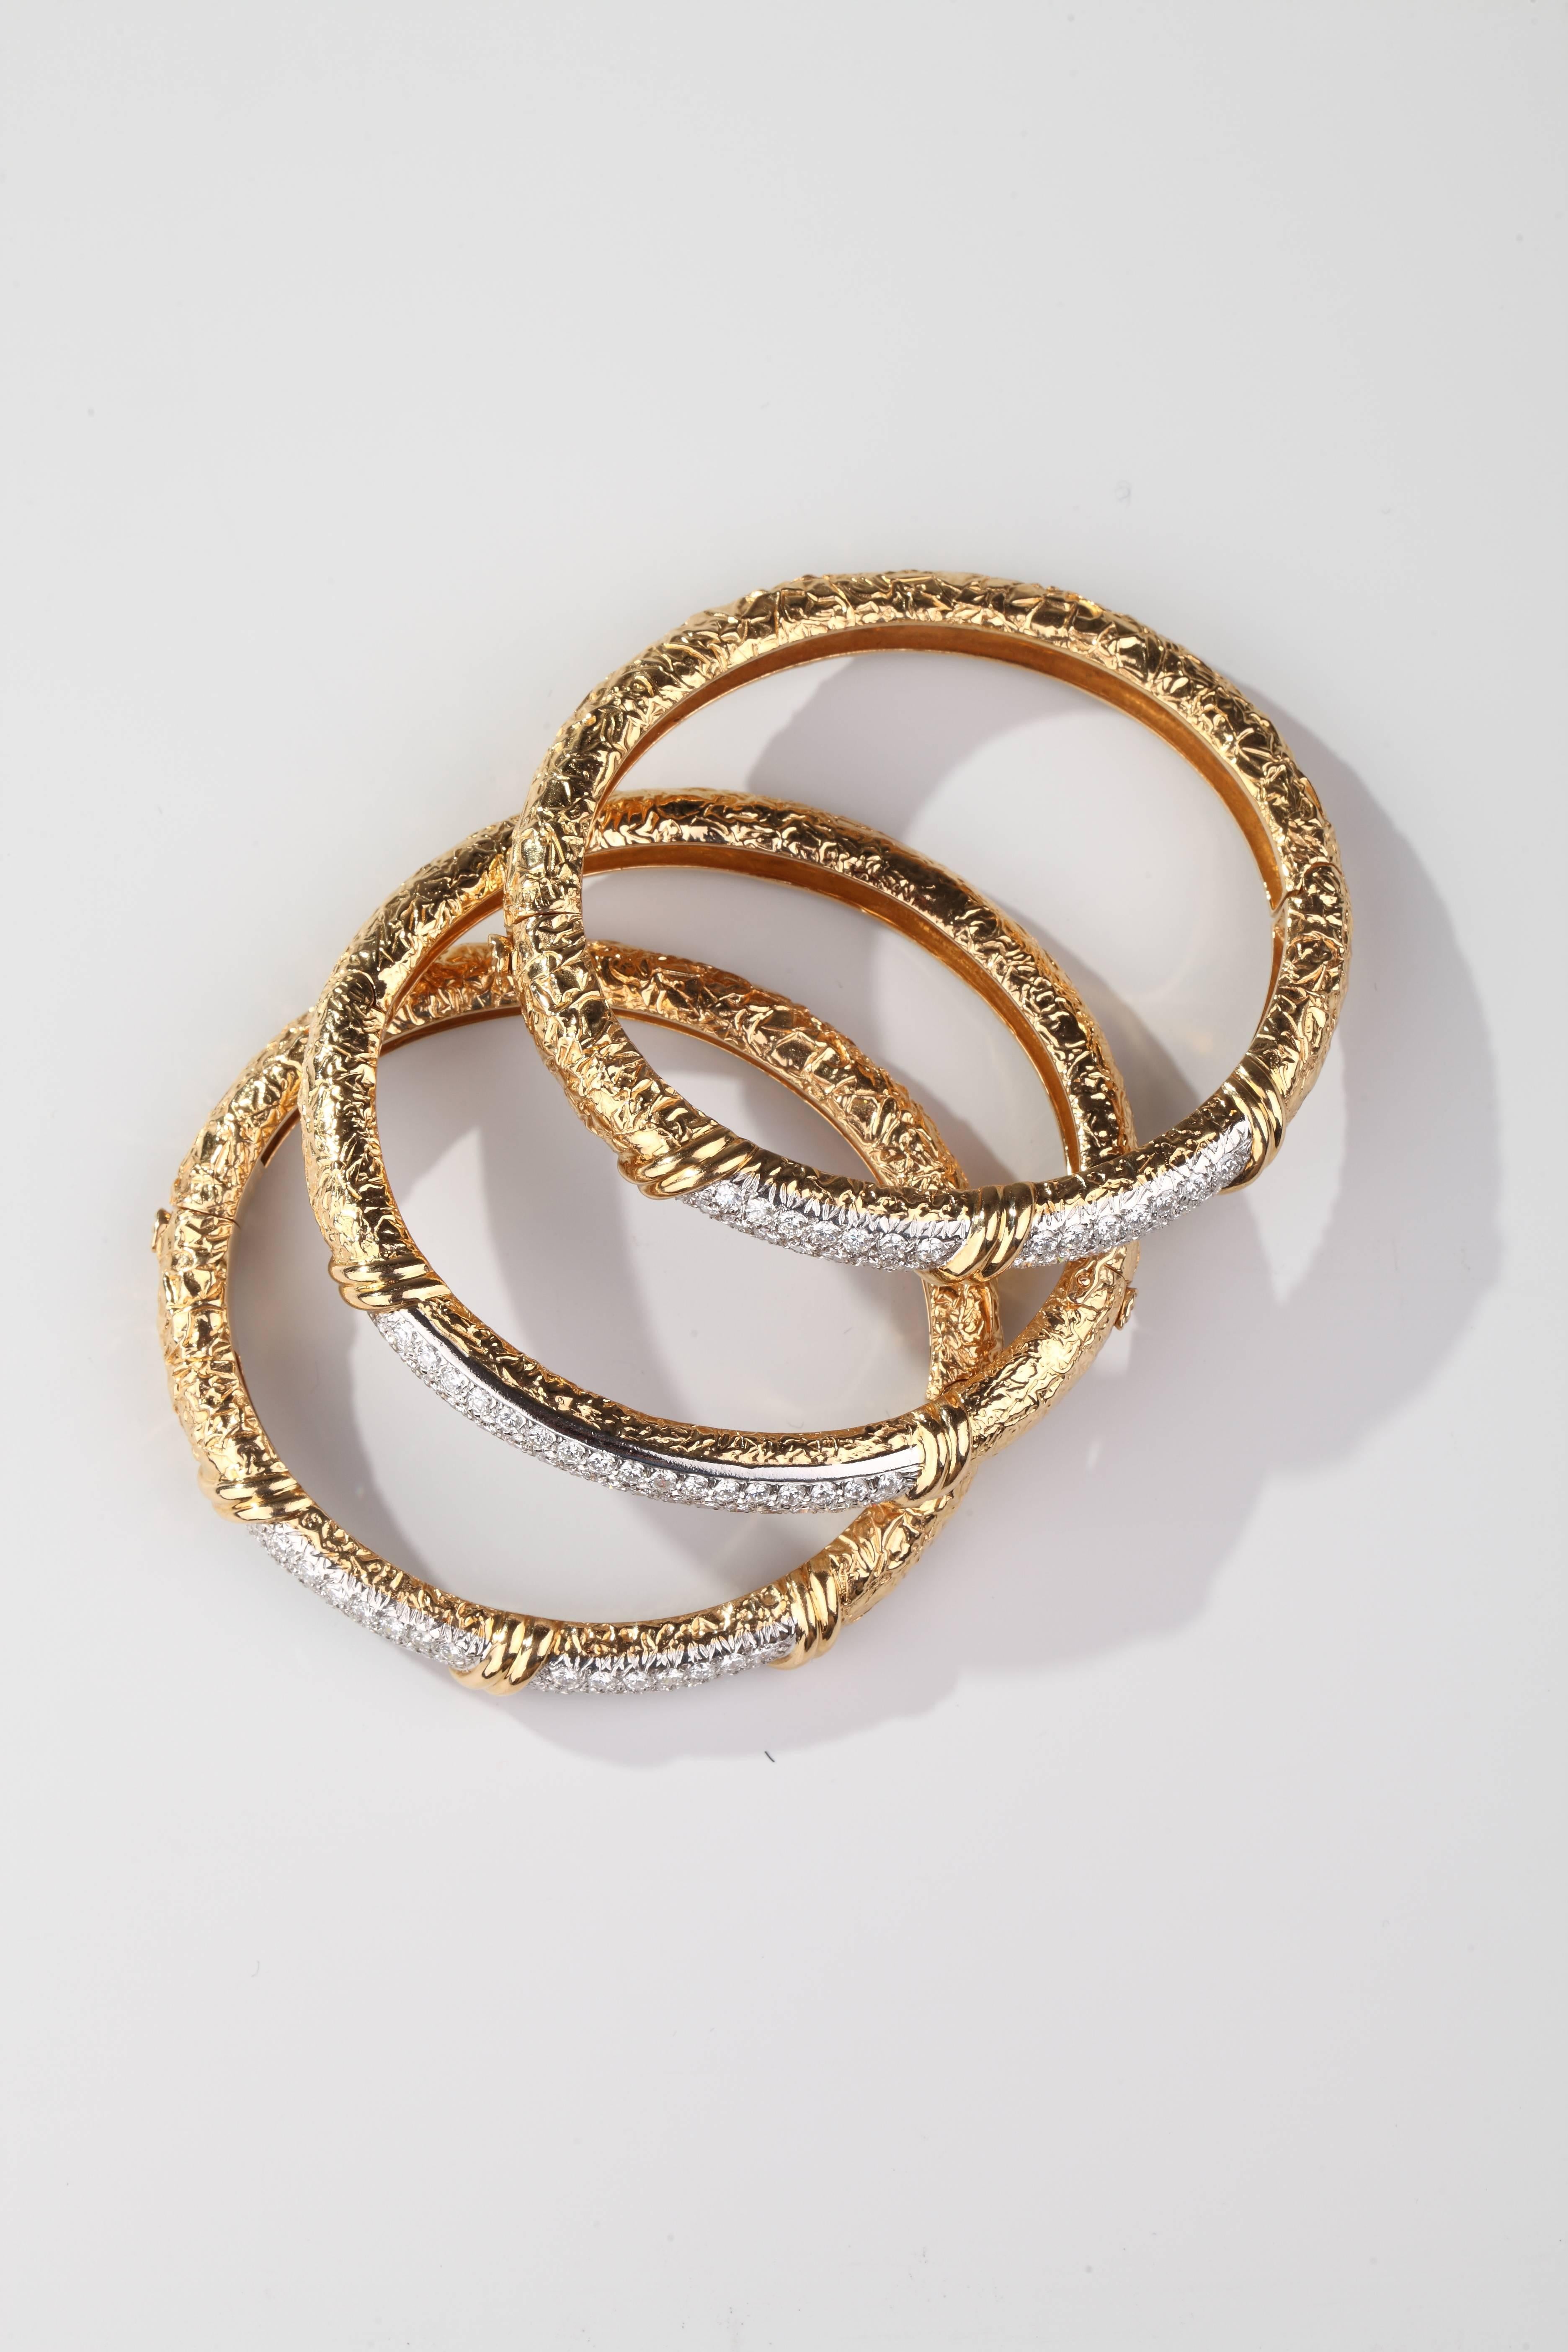 Three opening stiff bracelets in textured 18k yellow gold ornate on the top with motives set on platinum with brillant-cut diamonds. (weight around 6 ct FG VS quality on each bracelet).
Signed and numbered VCA.
French assay marks for gold and